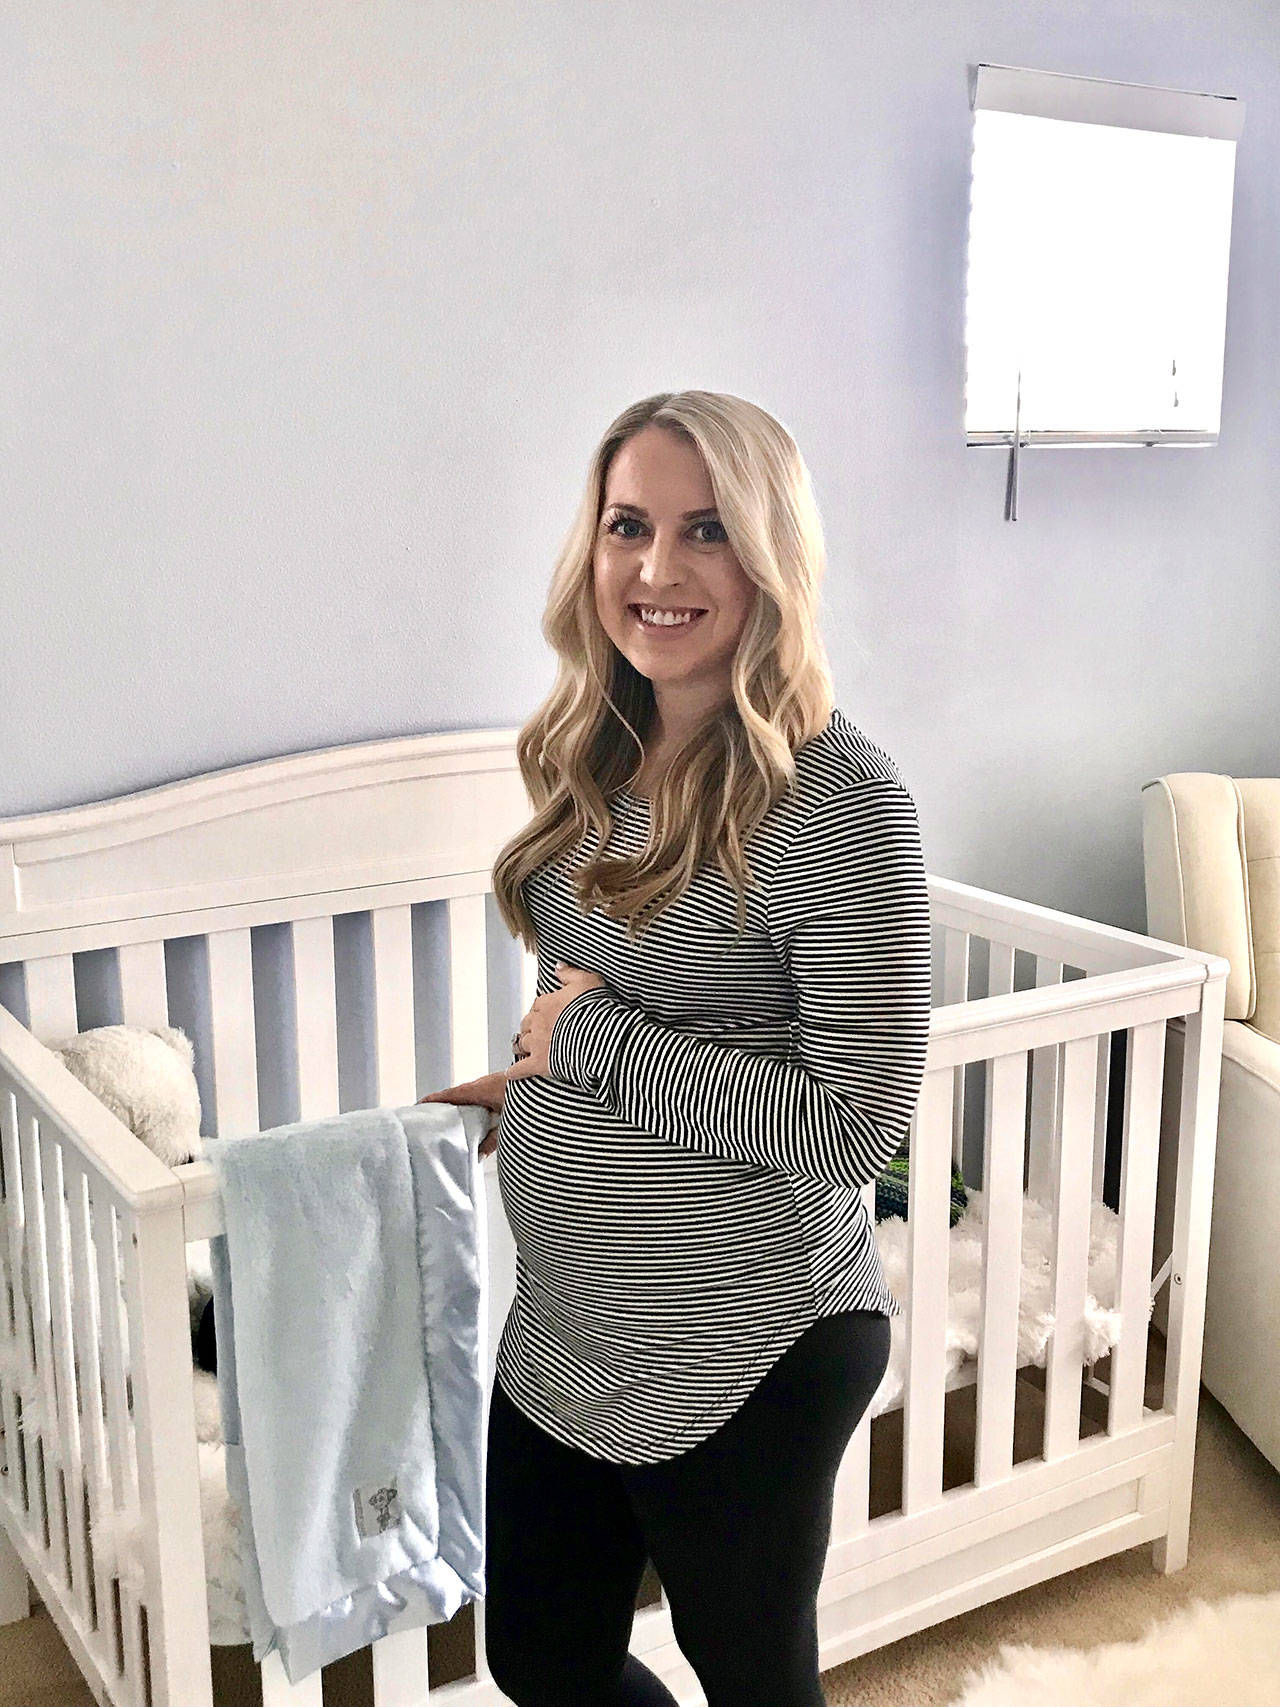 Kelsey Saty is 24 weeks pregnant with a little boy. Photo courtesy of Kelsey Saty